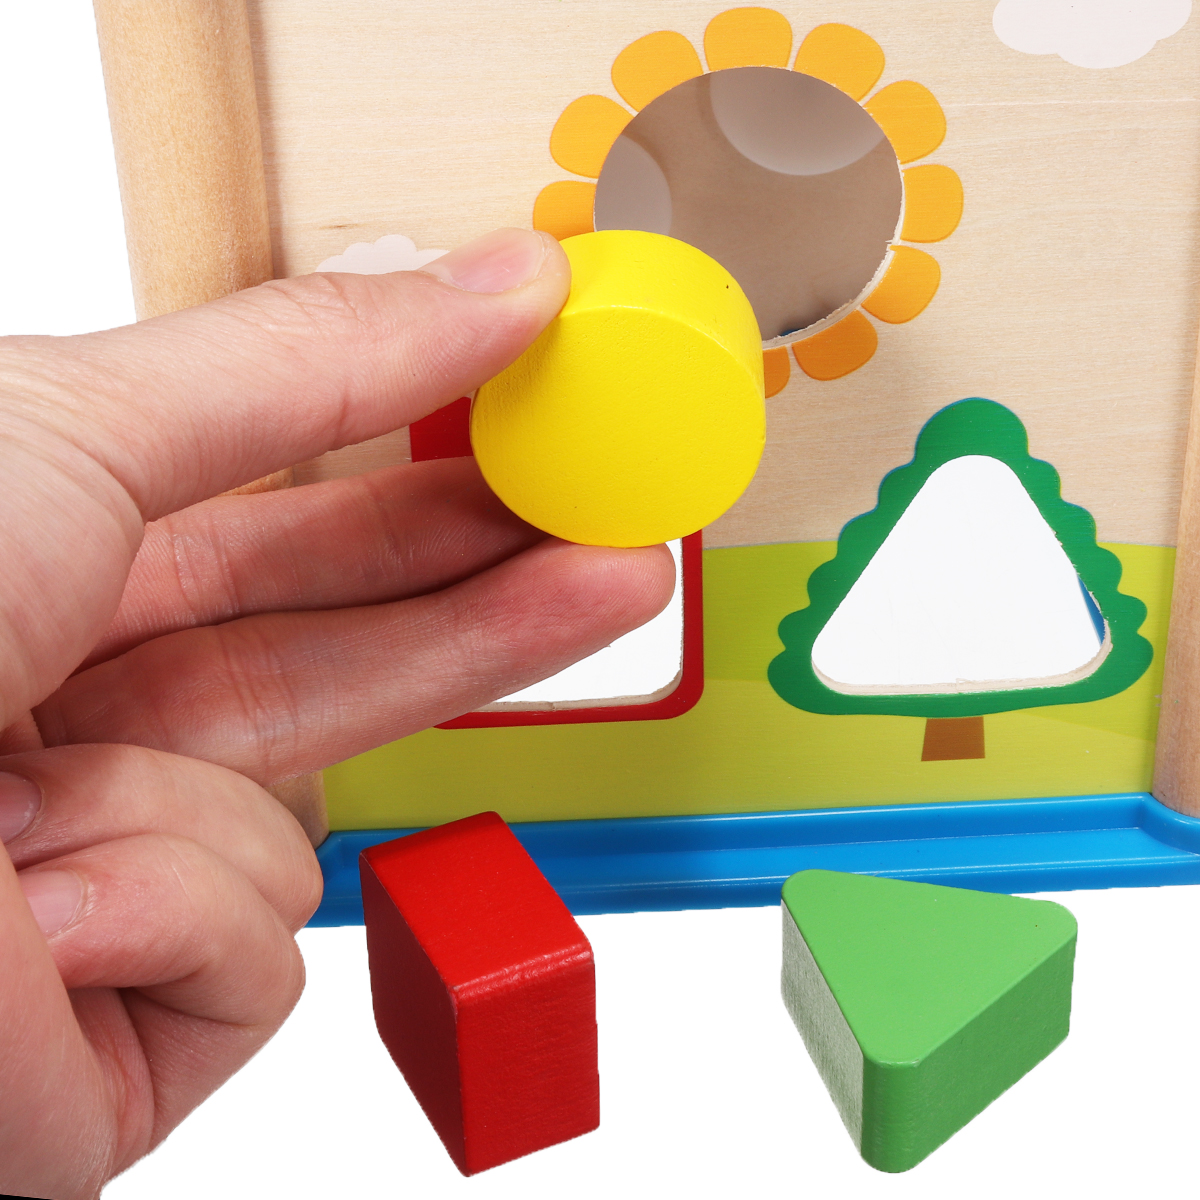 Wooden-Multi-functional-Wisdom-Aroind-Treasure-Box-with-Beads-Parent-child-Educational-Learning-Toy--1733559-10